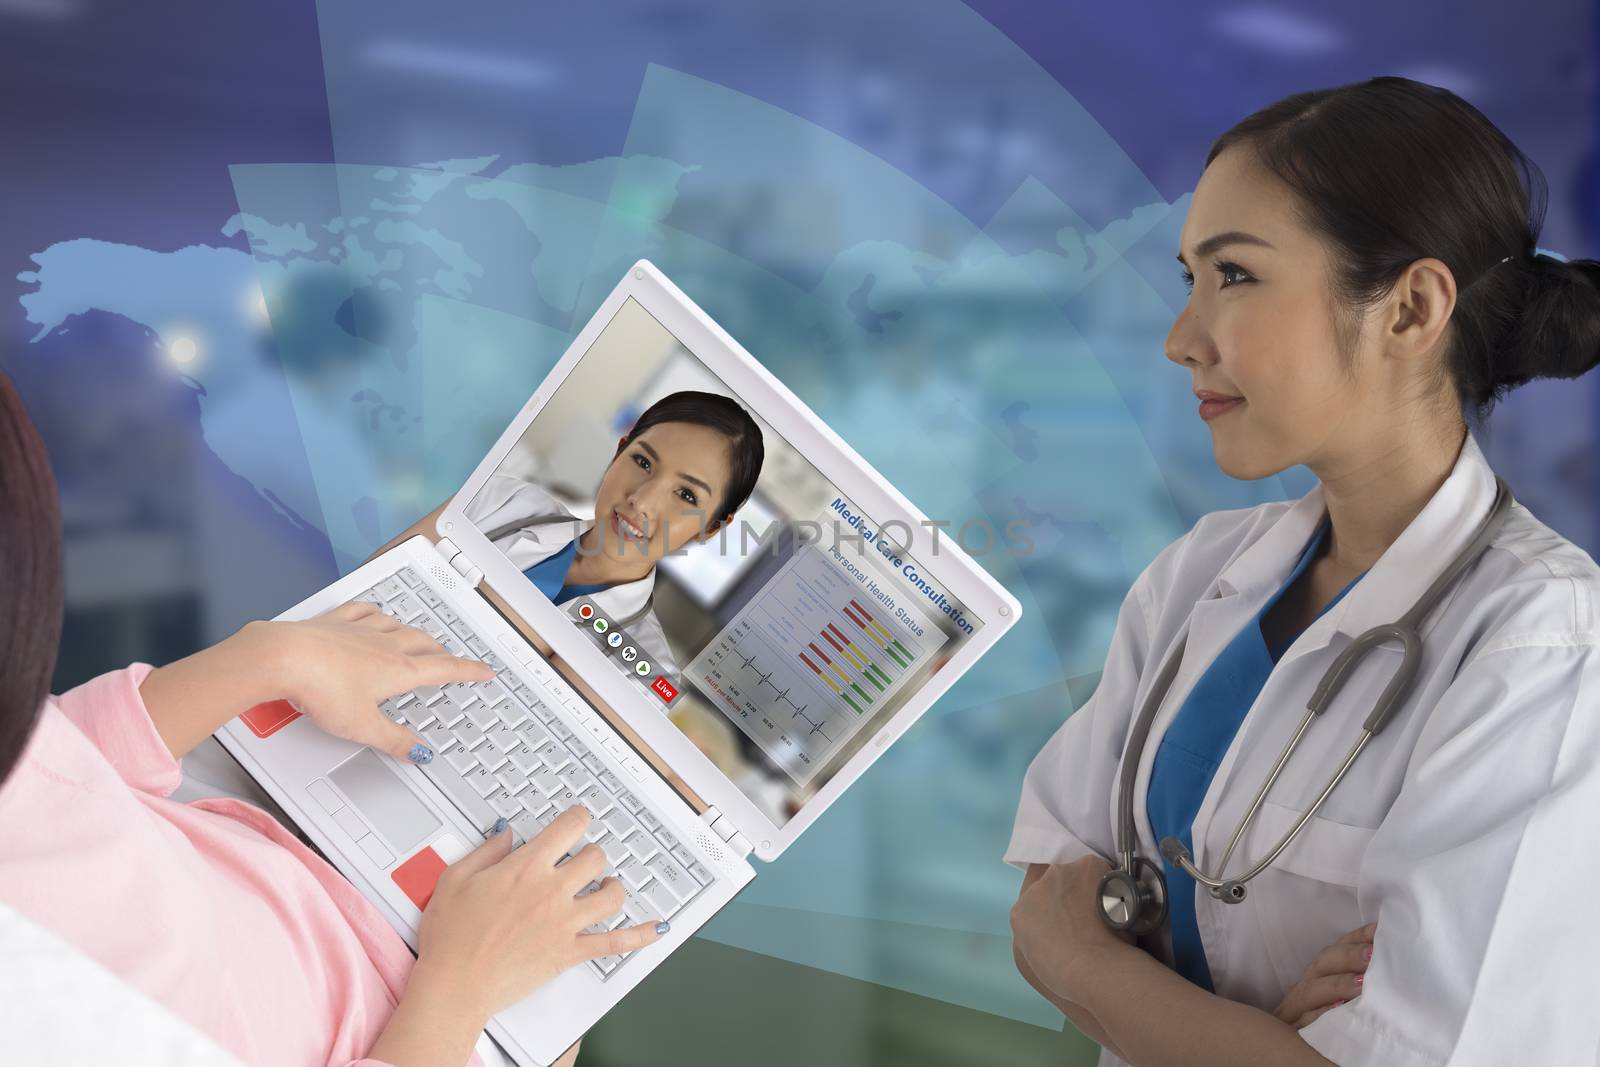 Photo of female doctor and her patien shown that patient seem to be closer to doctor by using teleconference for medical care consultation.